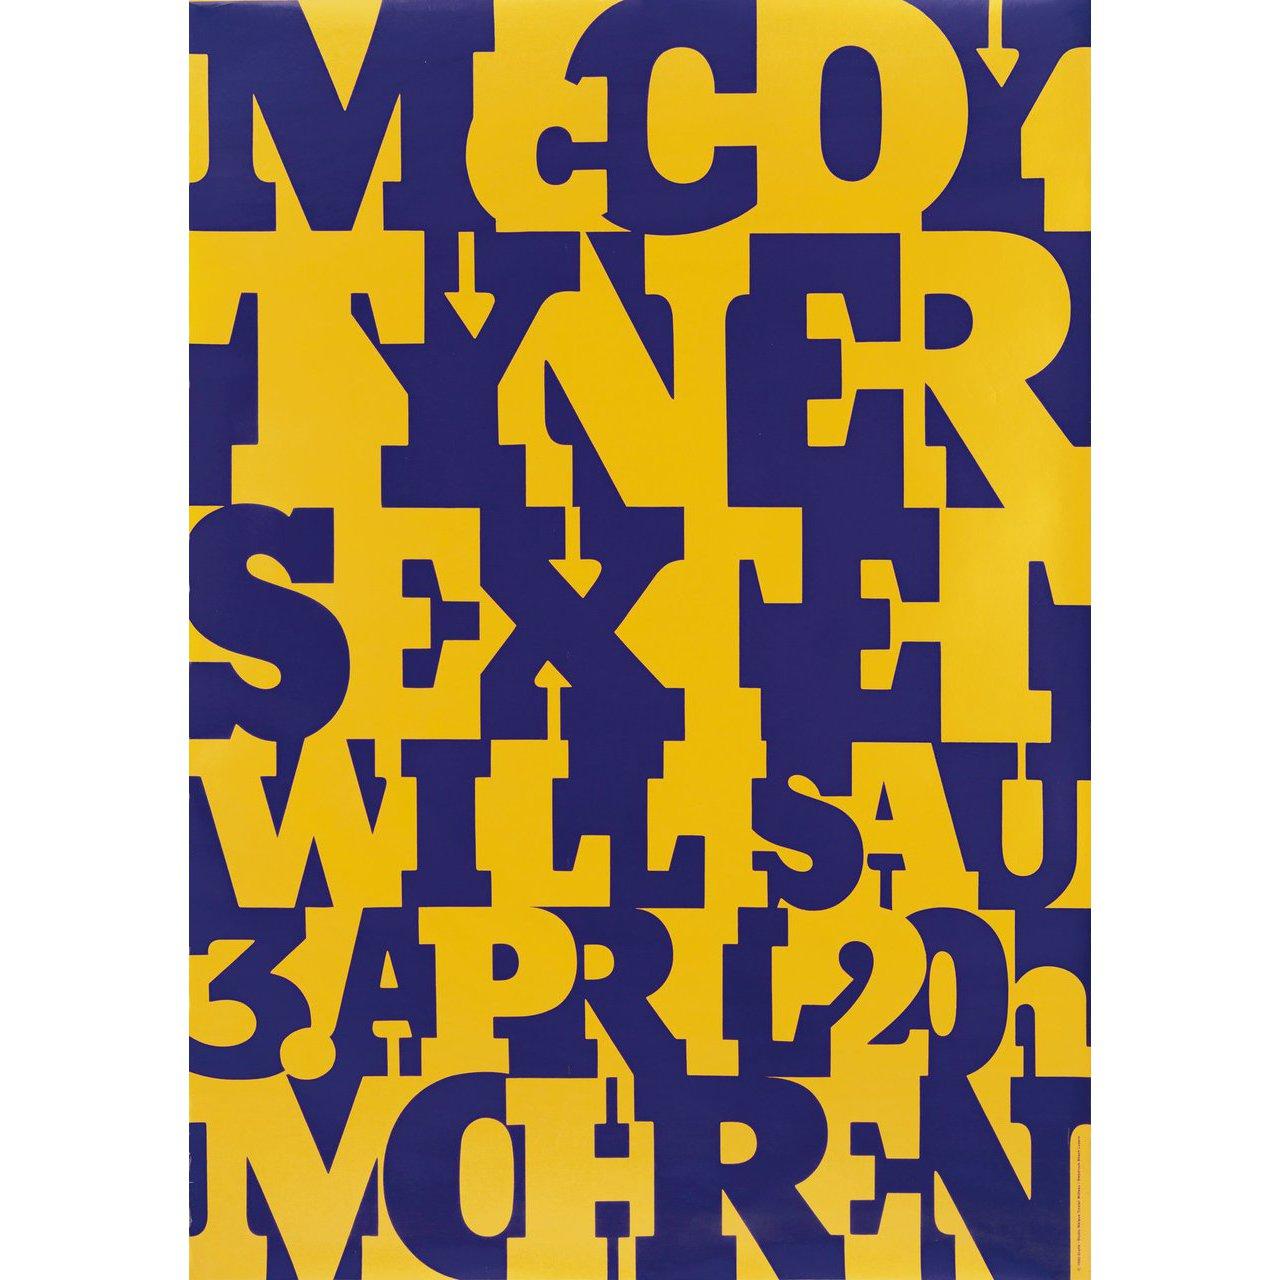 Original 1980 Swiss poster by Niklaus Troxler for Mccoy Tyner Sextet (1980). Very Good-Fine condition, rolled. Please note: the size is stated in inches and the actual size can vary by an inch or more.